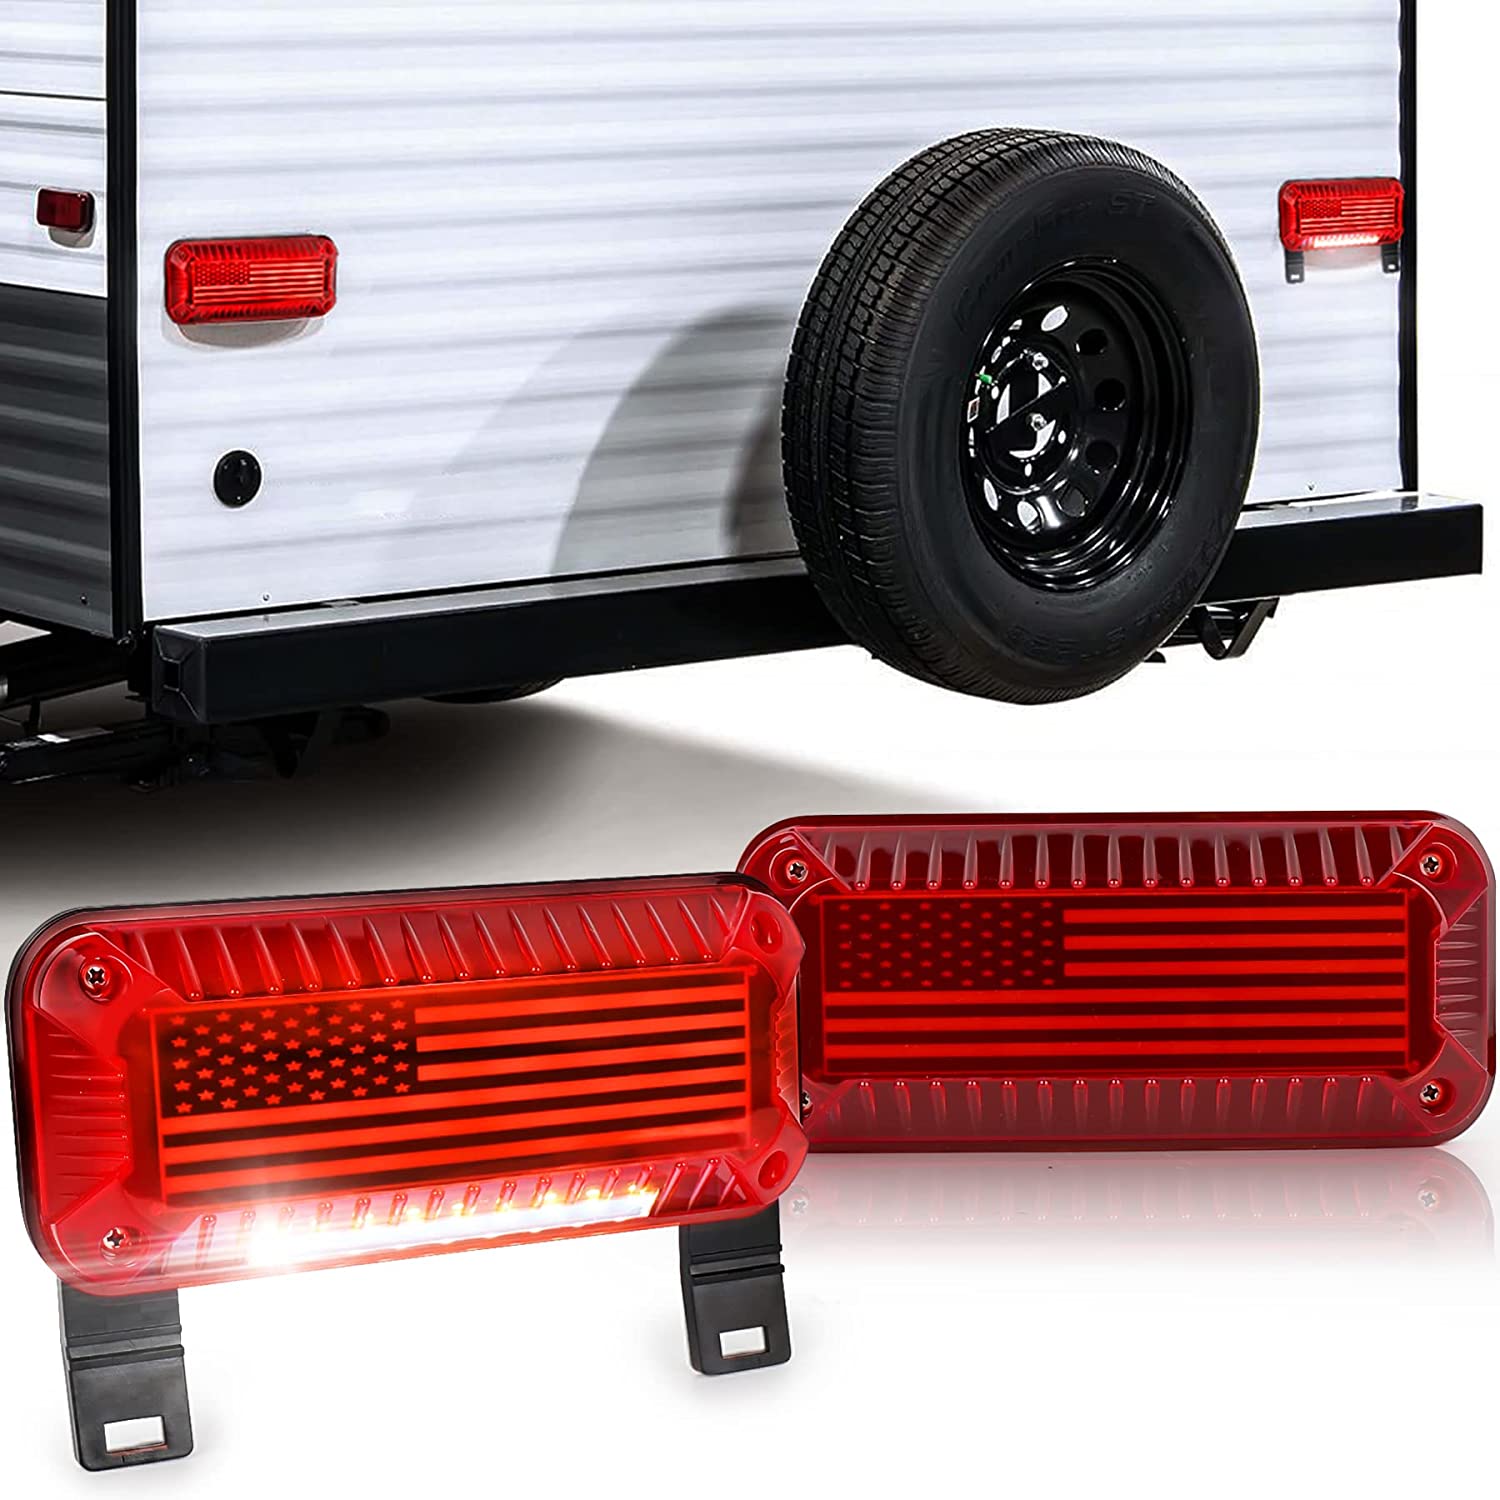 RV Tail Lights, 57 LED RV Camper Trailer Tail Lights With Running/Turn Signal /Brake/Stop License Plate Light Surface Mount RV Led Tail Lights